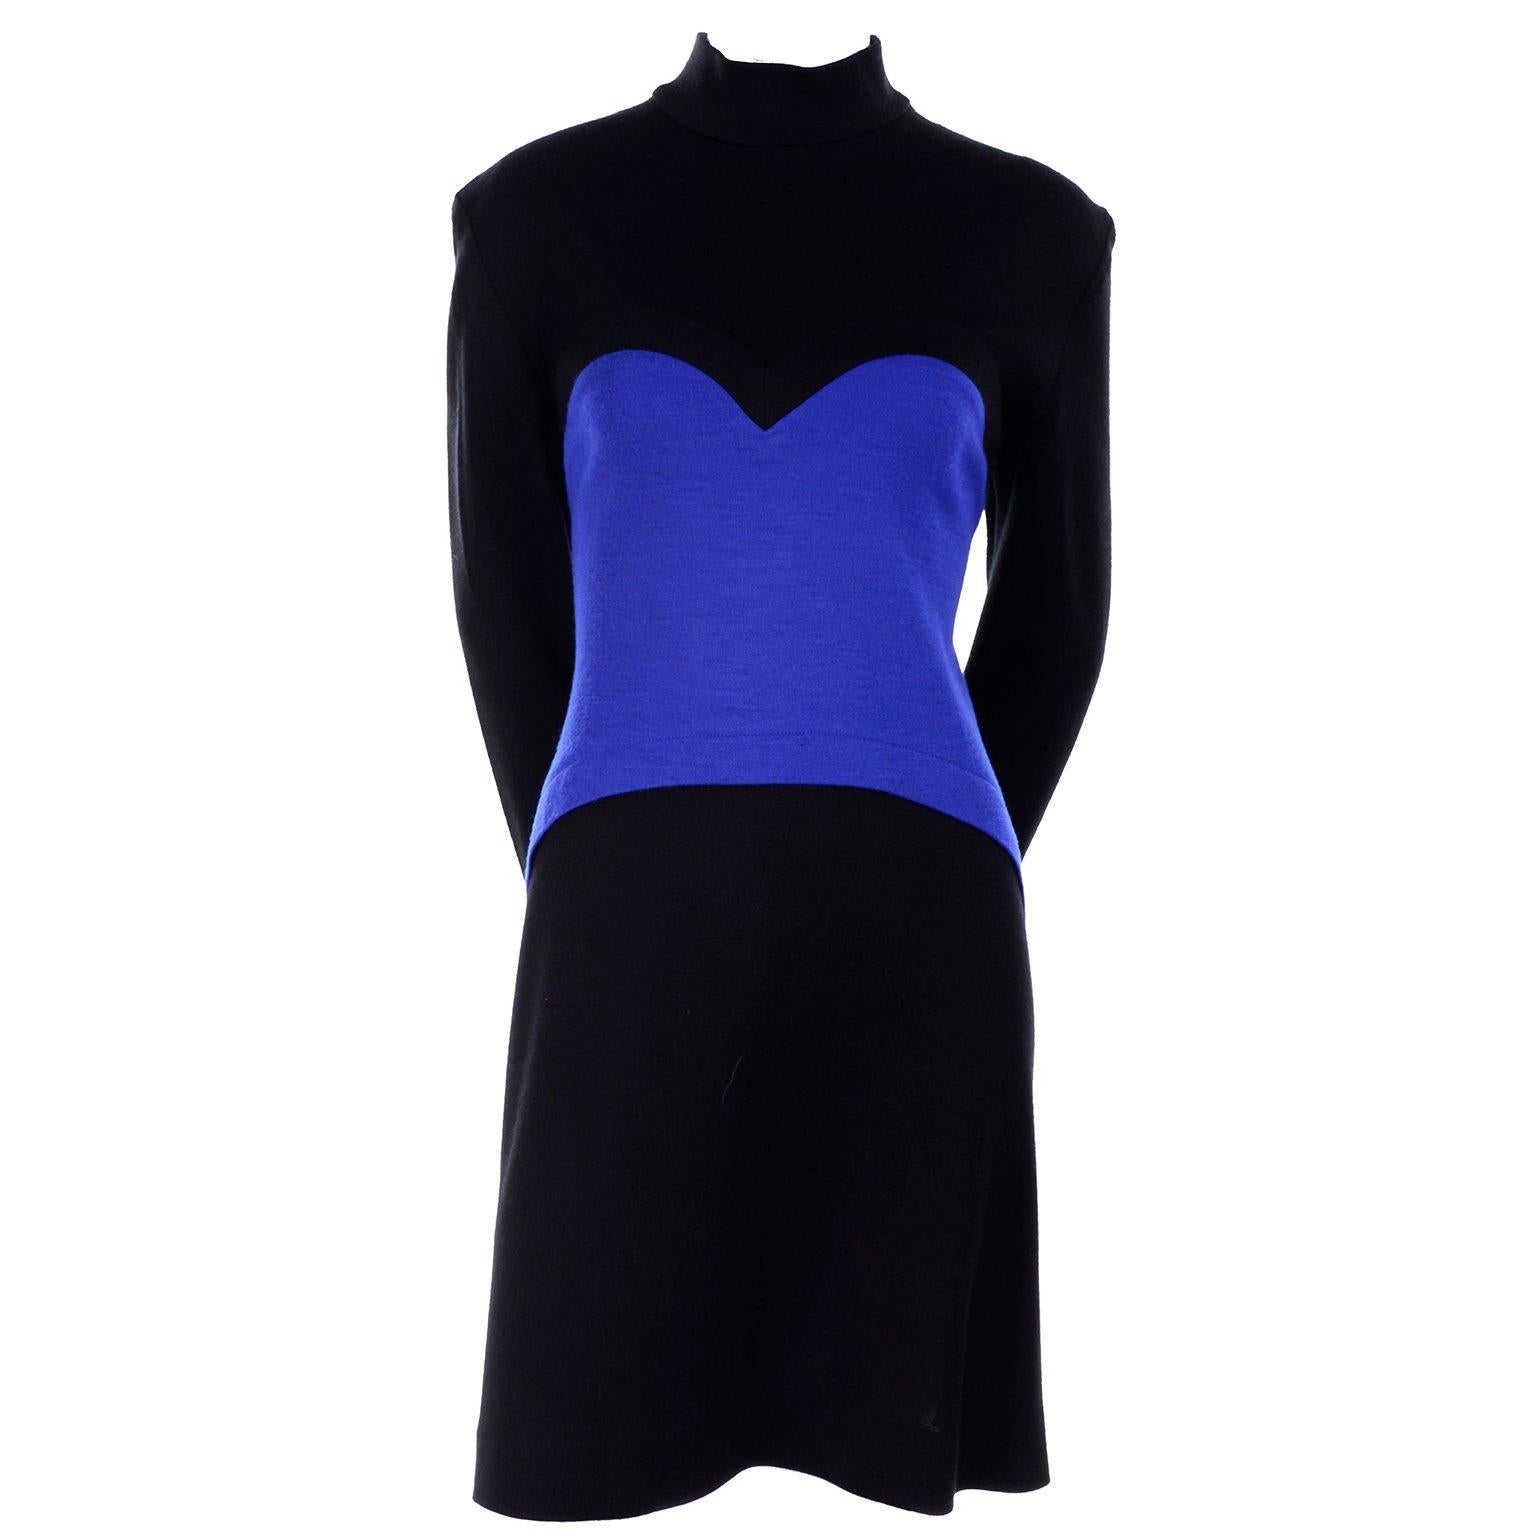 1980s Patrick Kelly Vintage Dress in Blue and Black Color Block Heart Wool Knit